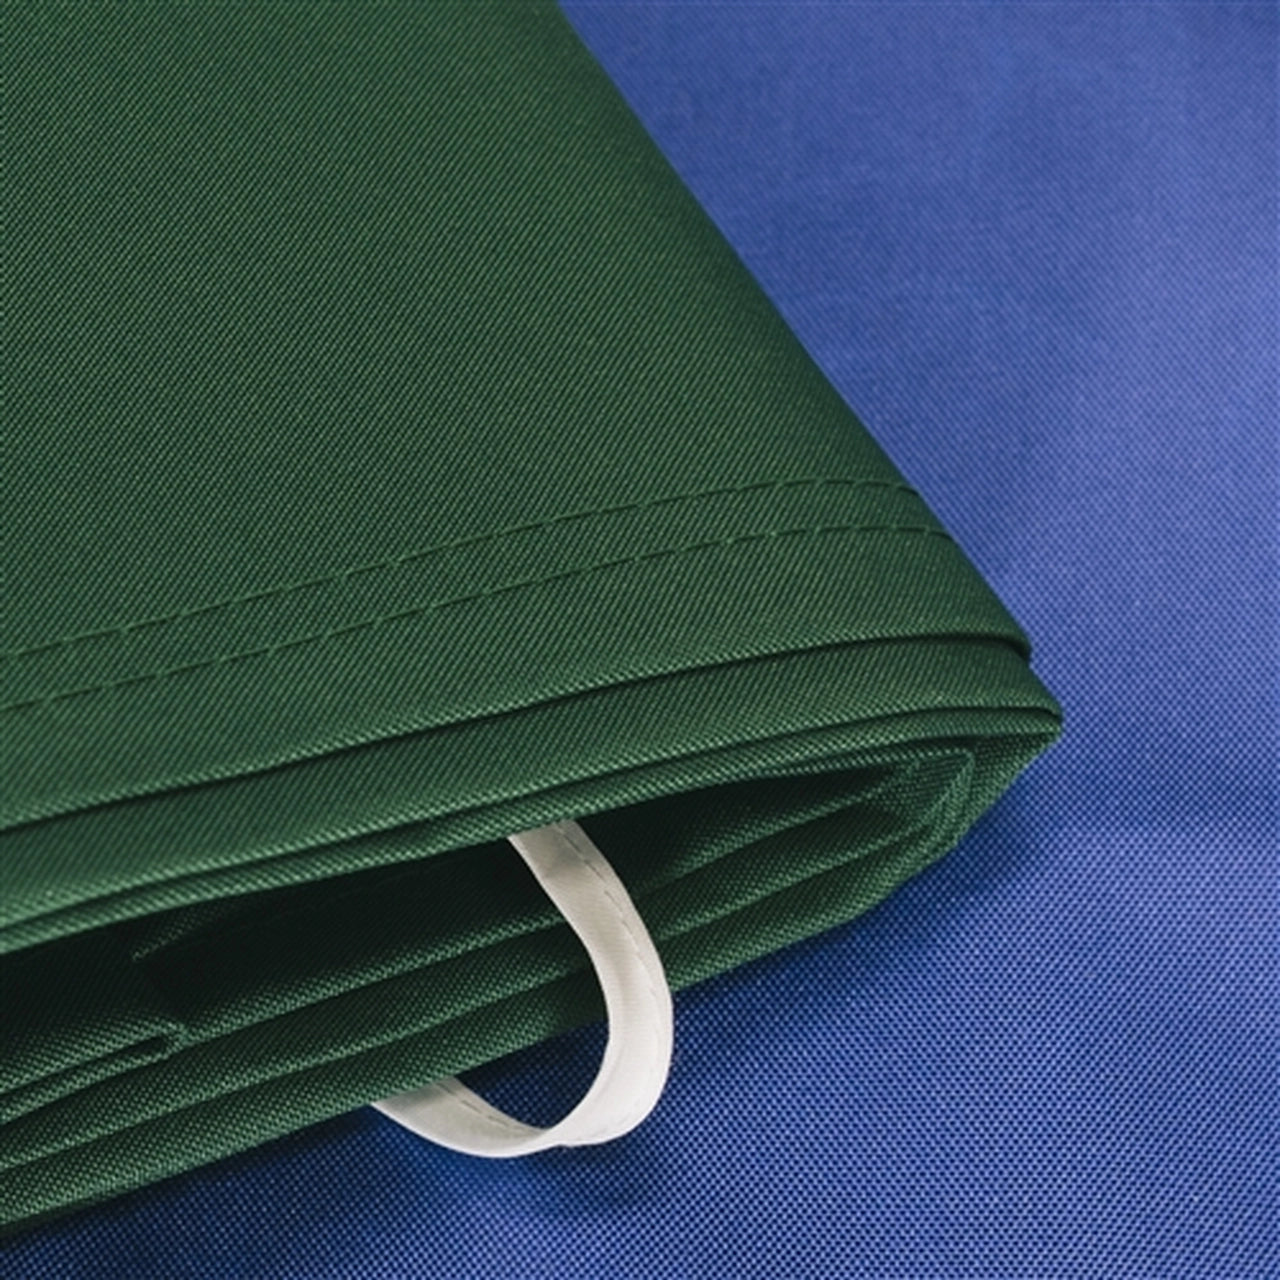 Aleko Protective Awning Cover - 10 x 8 Feet - Green